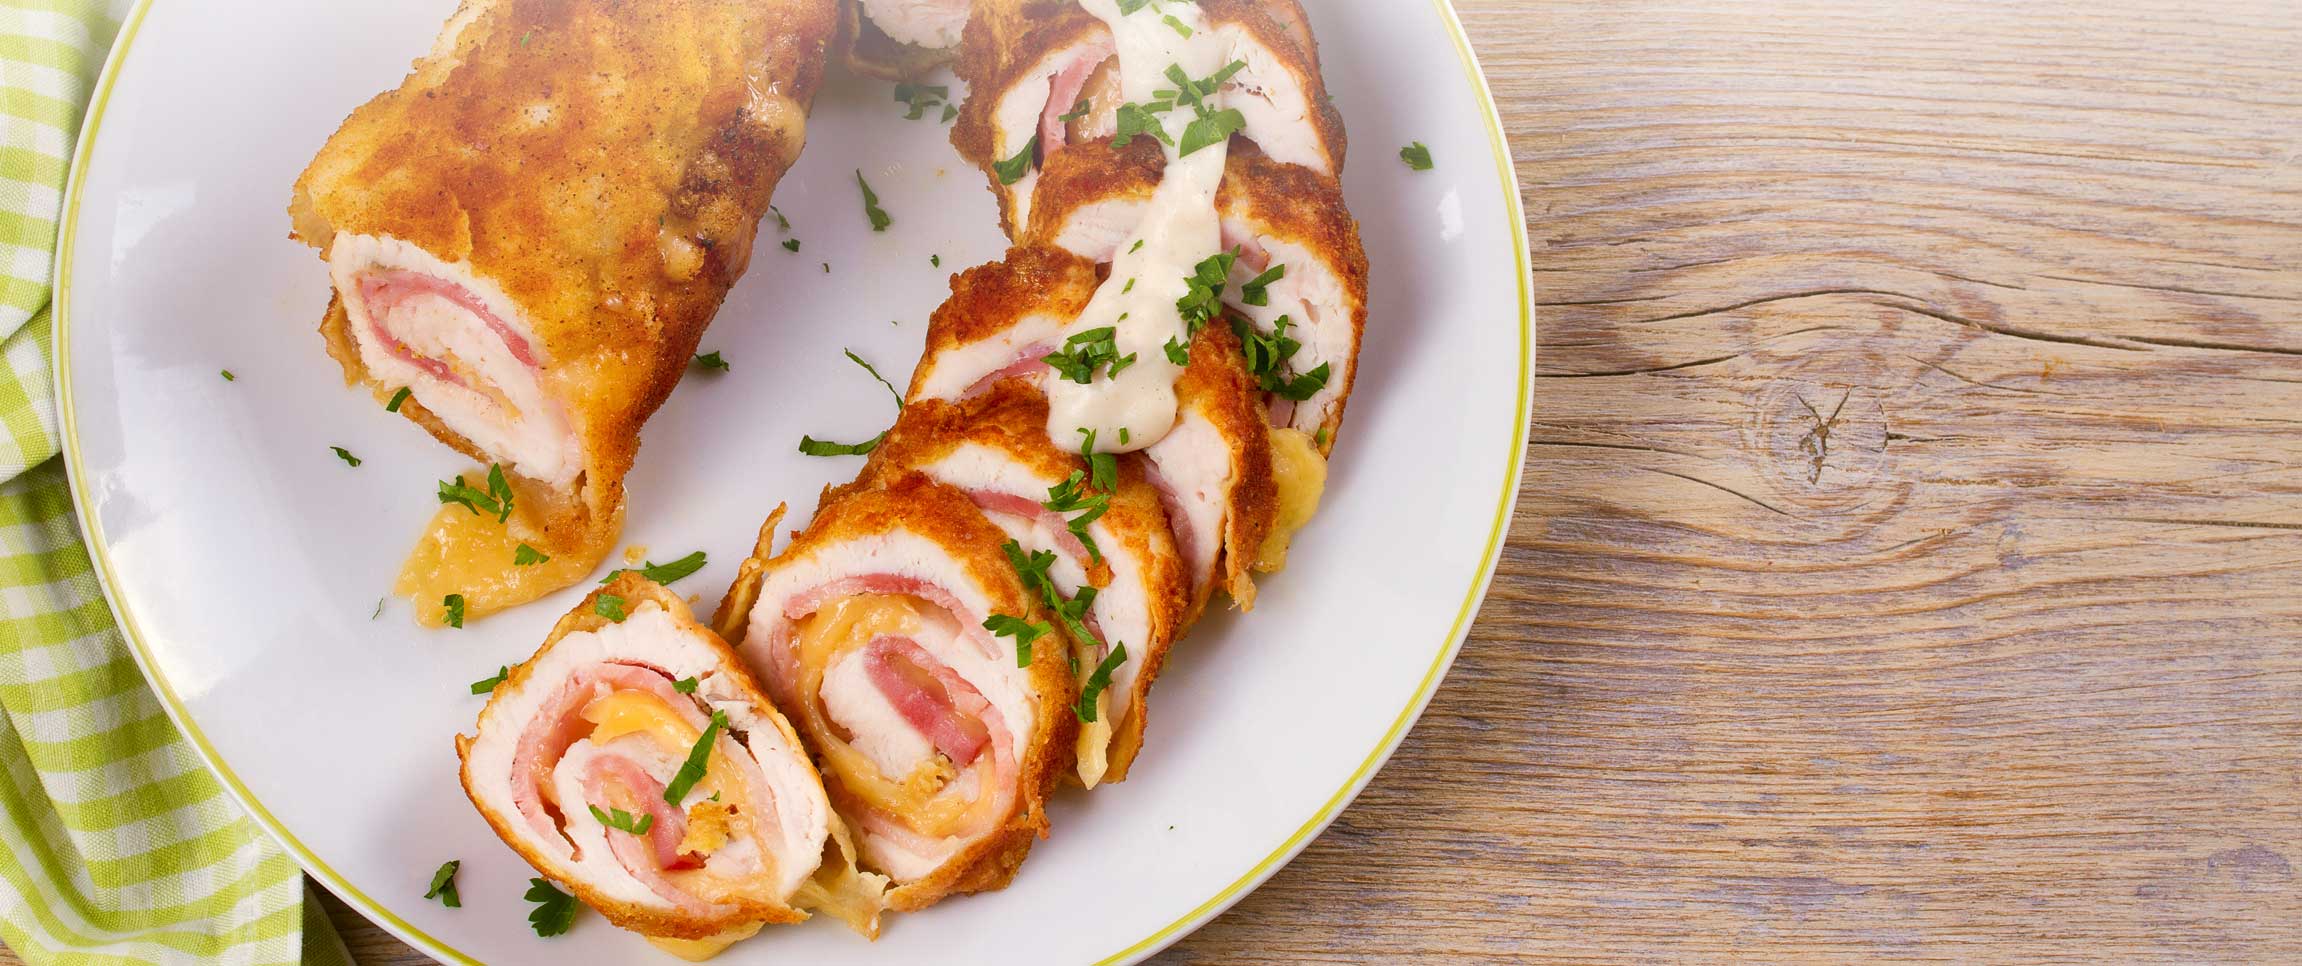 Brie Bacon and Onion Stuffed Chicken Breast